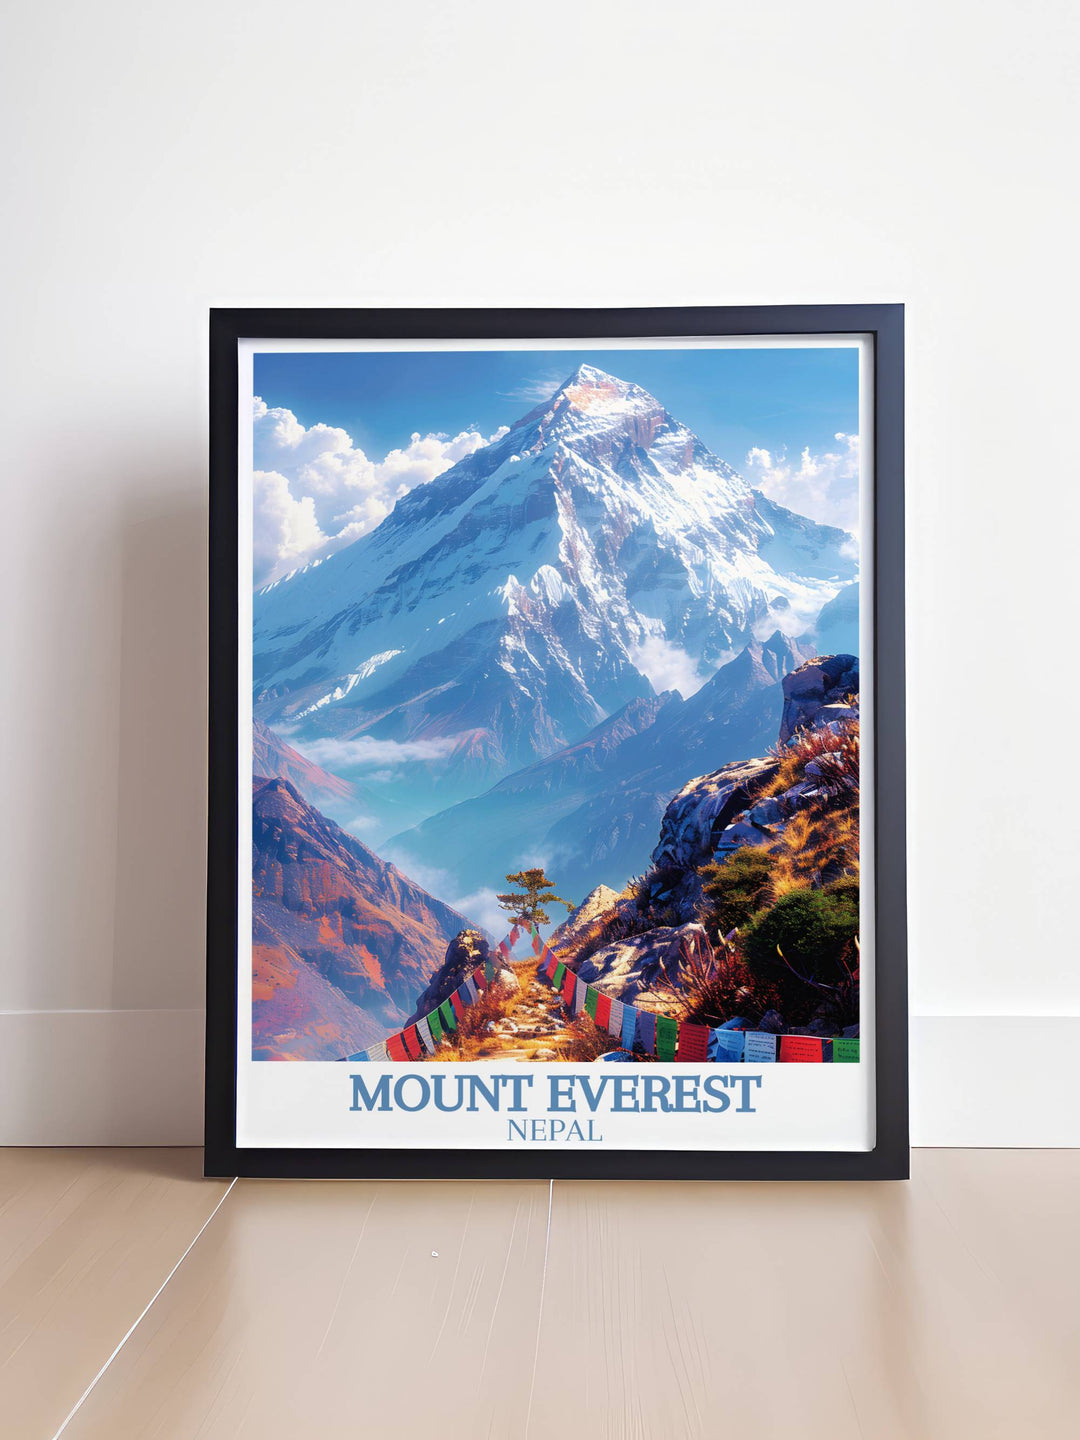 Kala Patthar Framed Art capturing the detailed textures of Everests rocky base contrasted with the snowy peak.